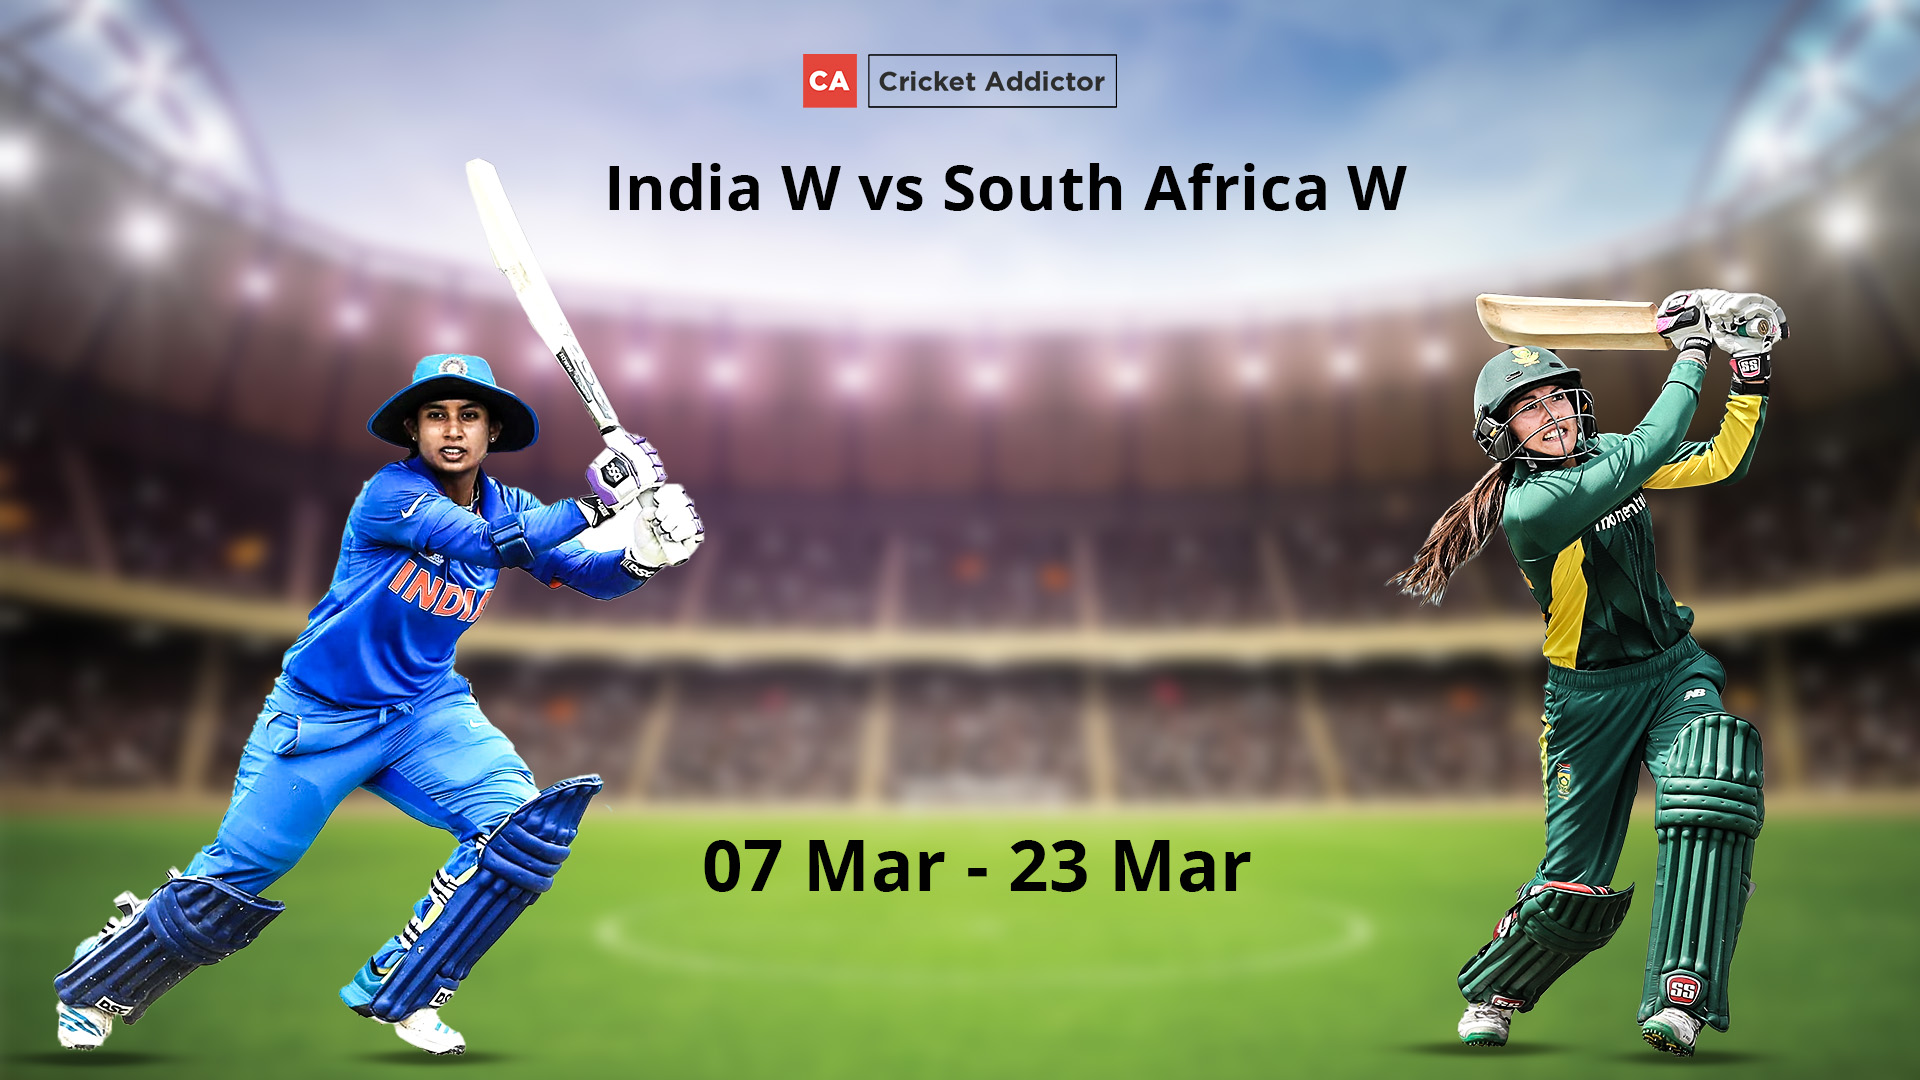 India Women vs South Africa Women 2021: Complete Schedule, Venues, Complete Squads, Live Streaming Details And Everything You Need To Know